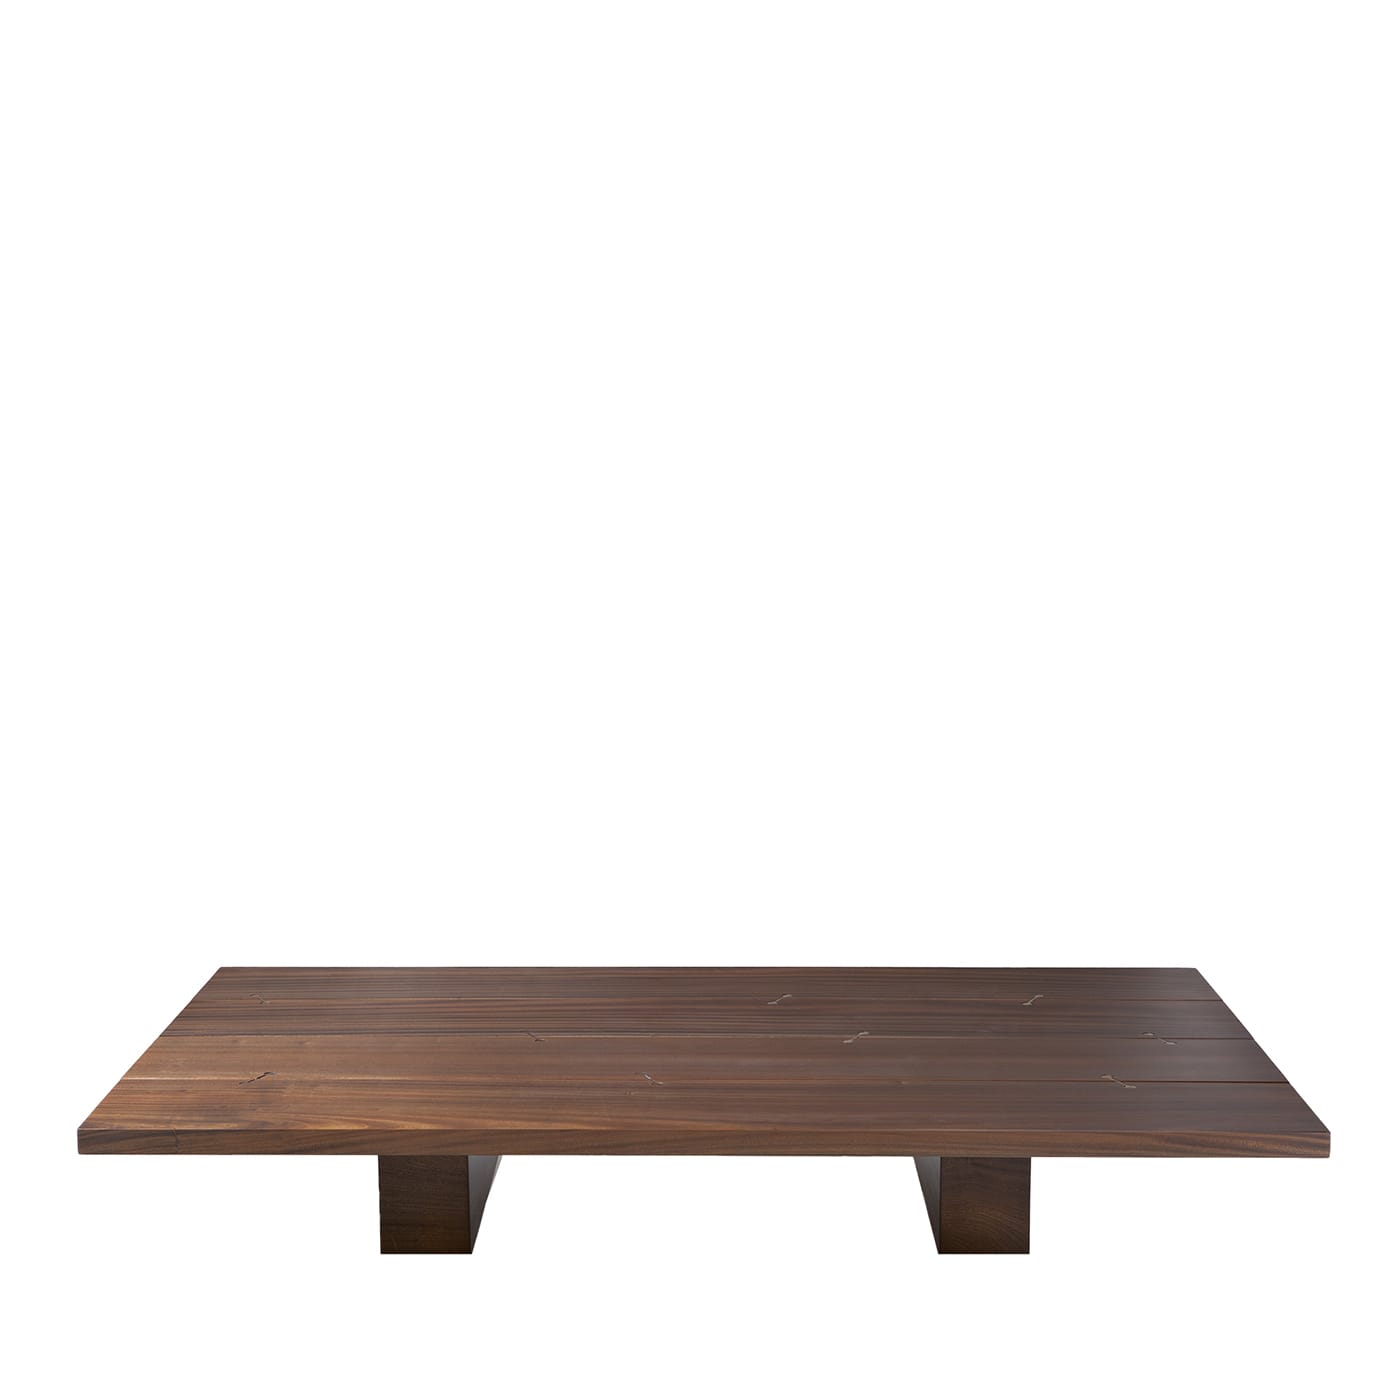 10th Joint Rectangular Coffee Table by Massimo Castagna - Exteta